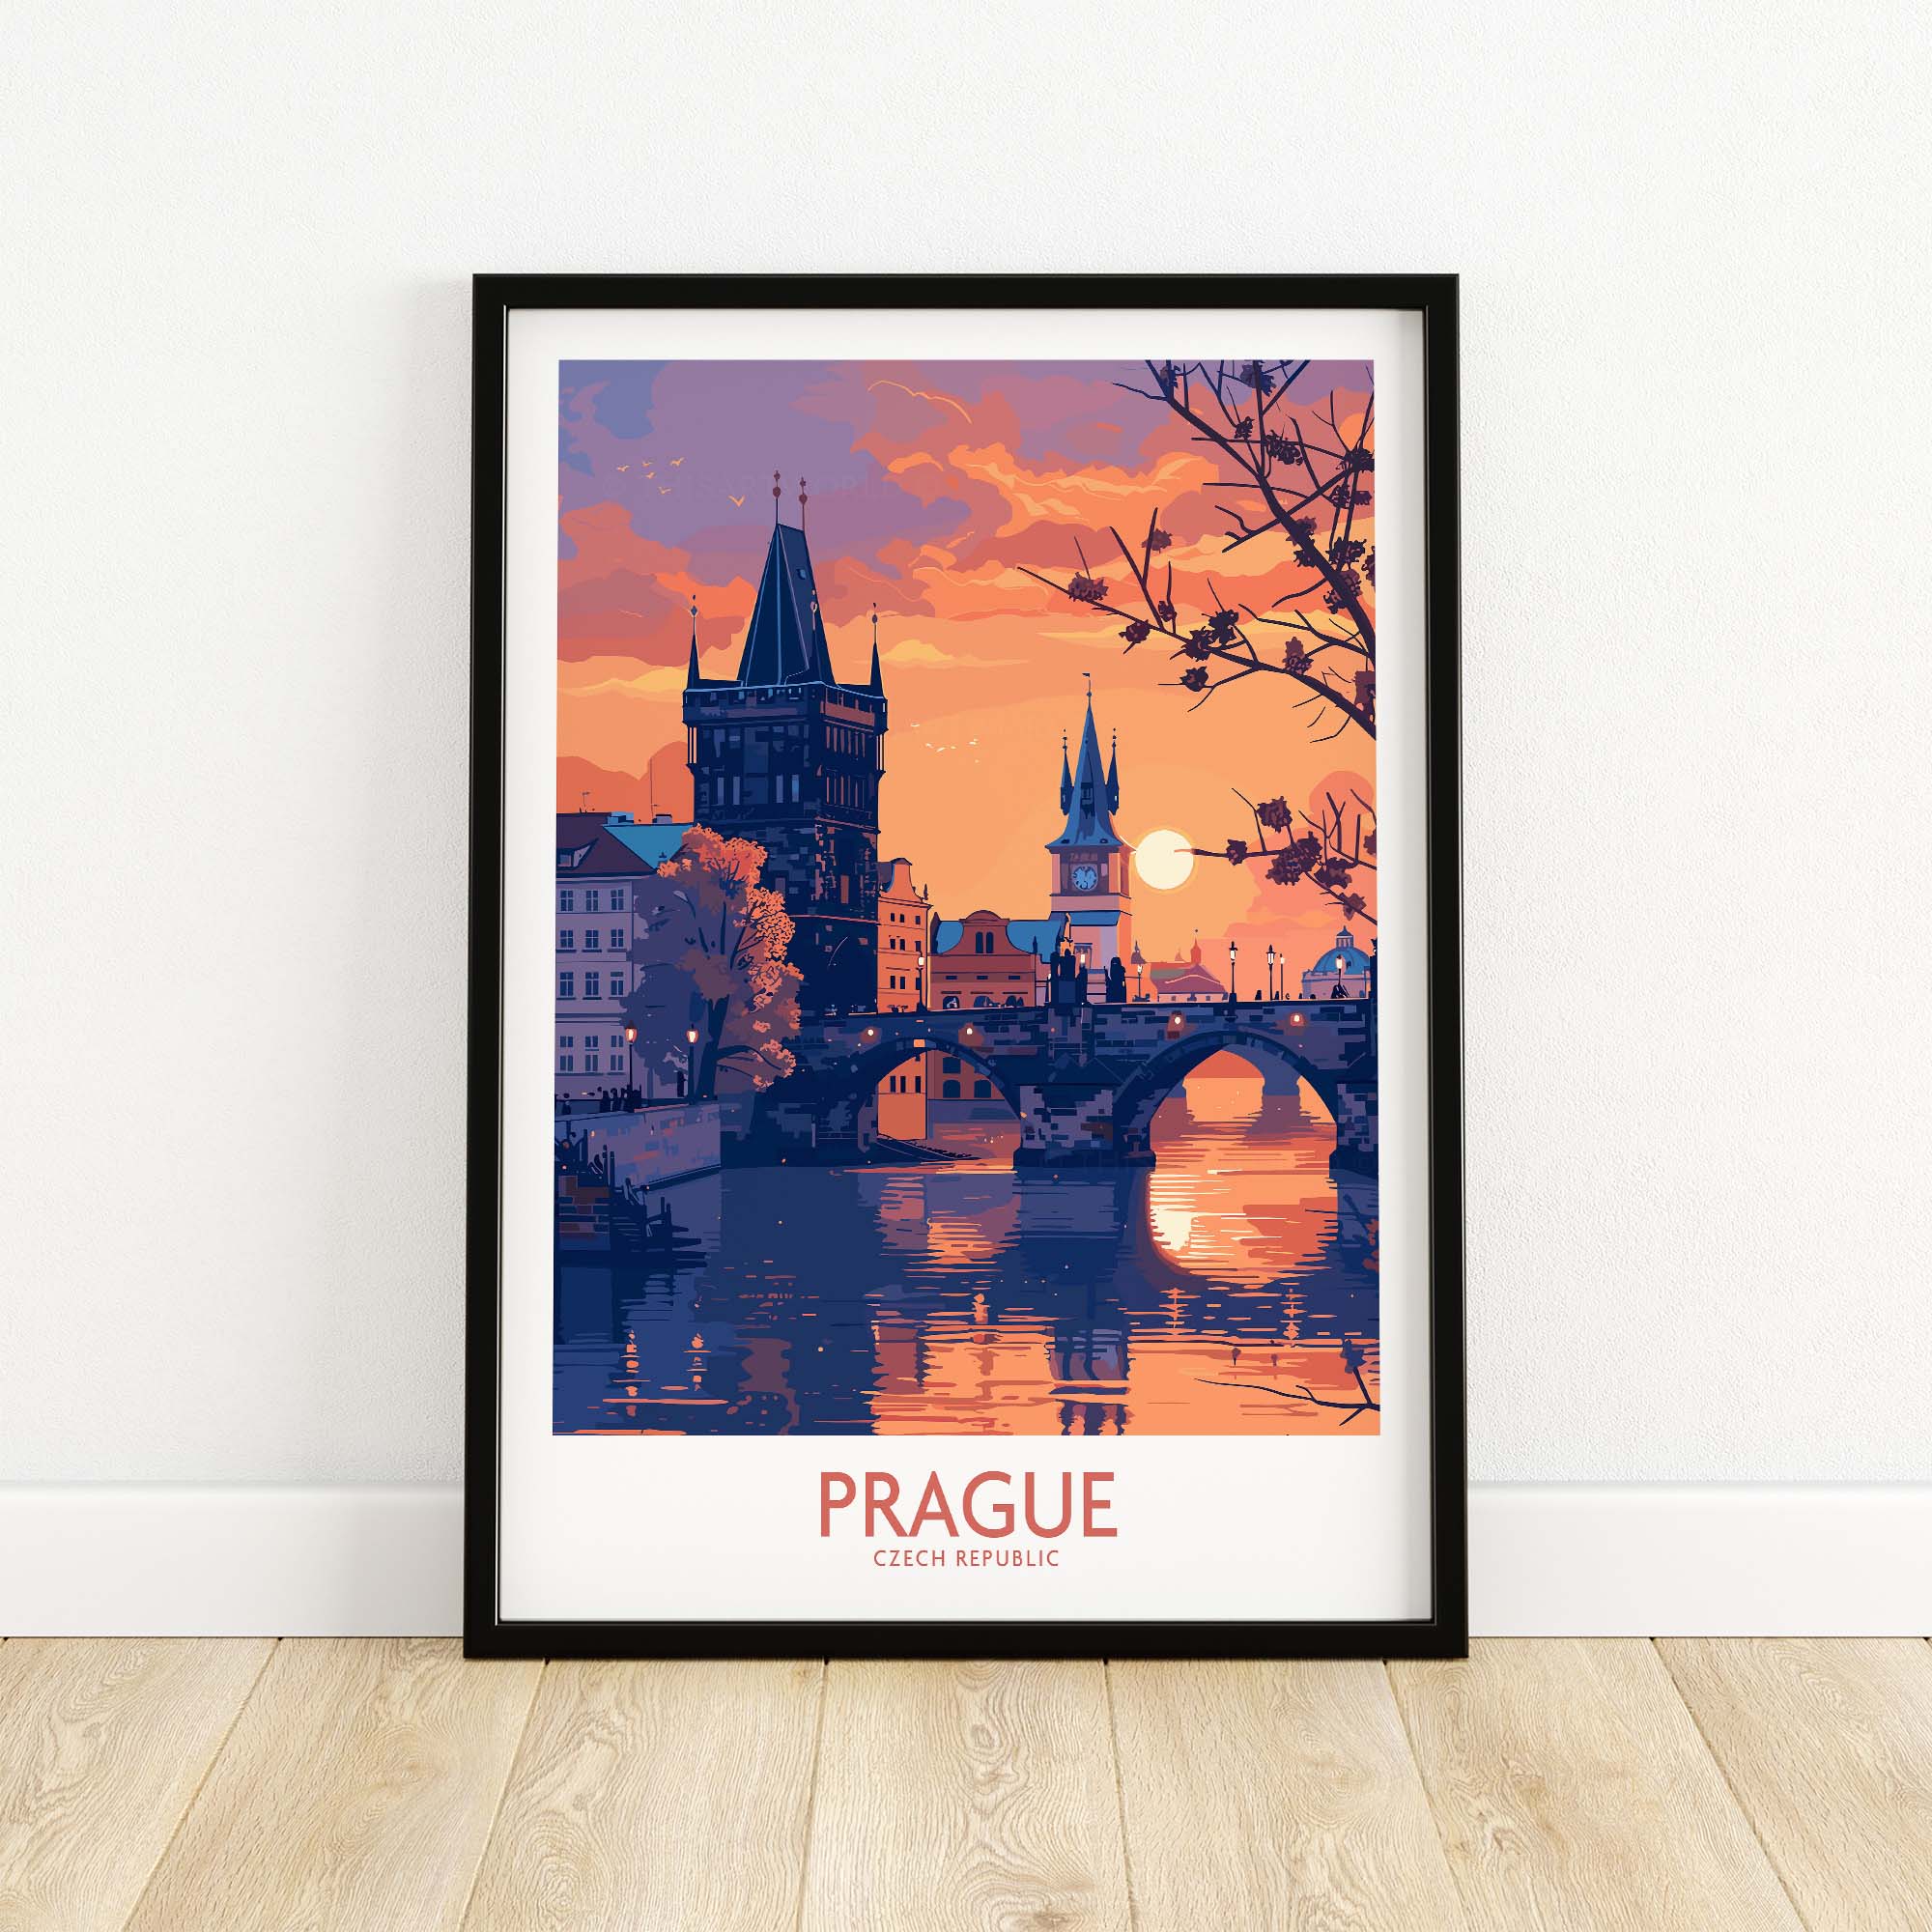 Prague Print view our best collection or travel posters and prints - ThisArtWorld